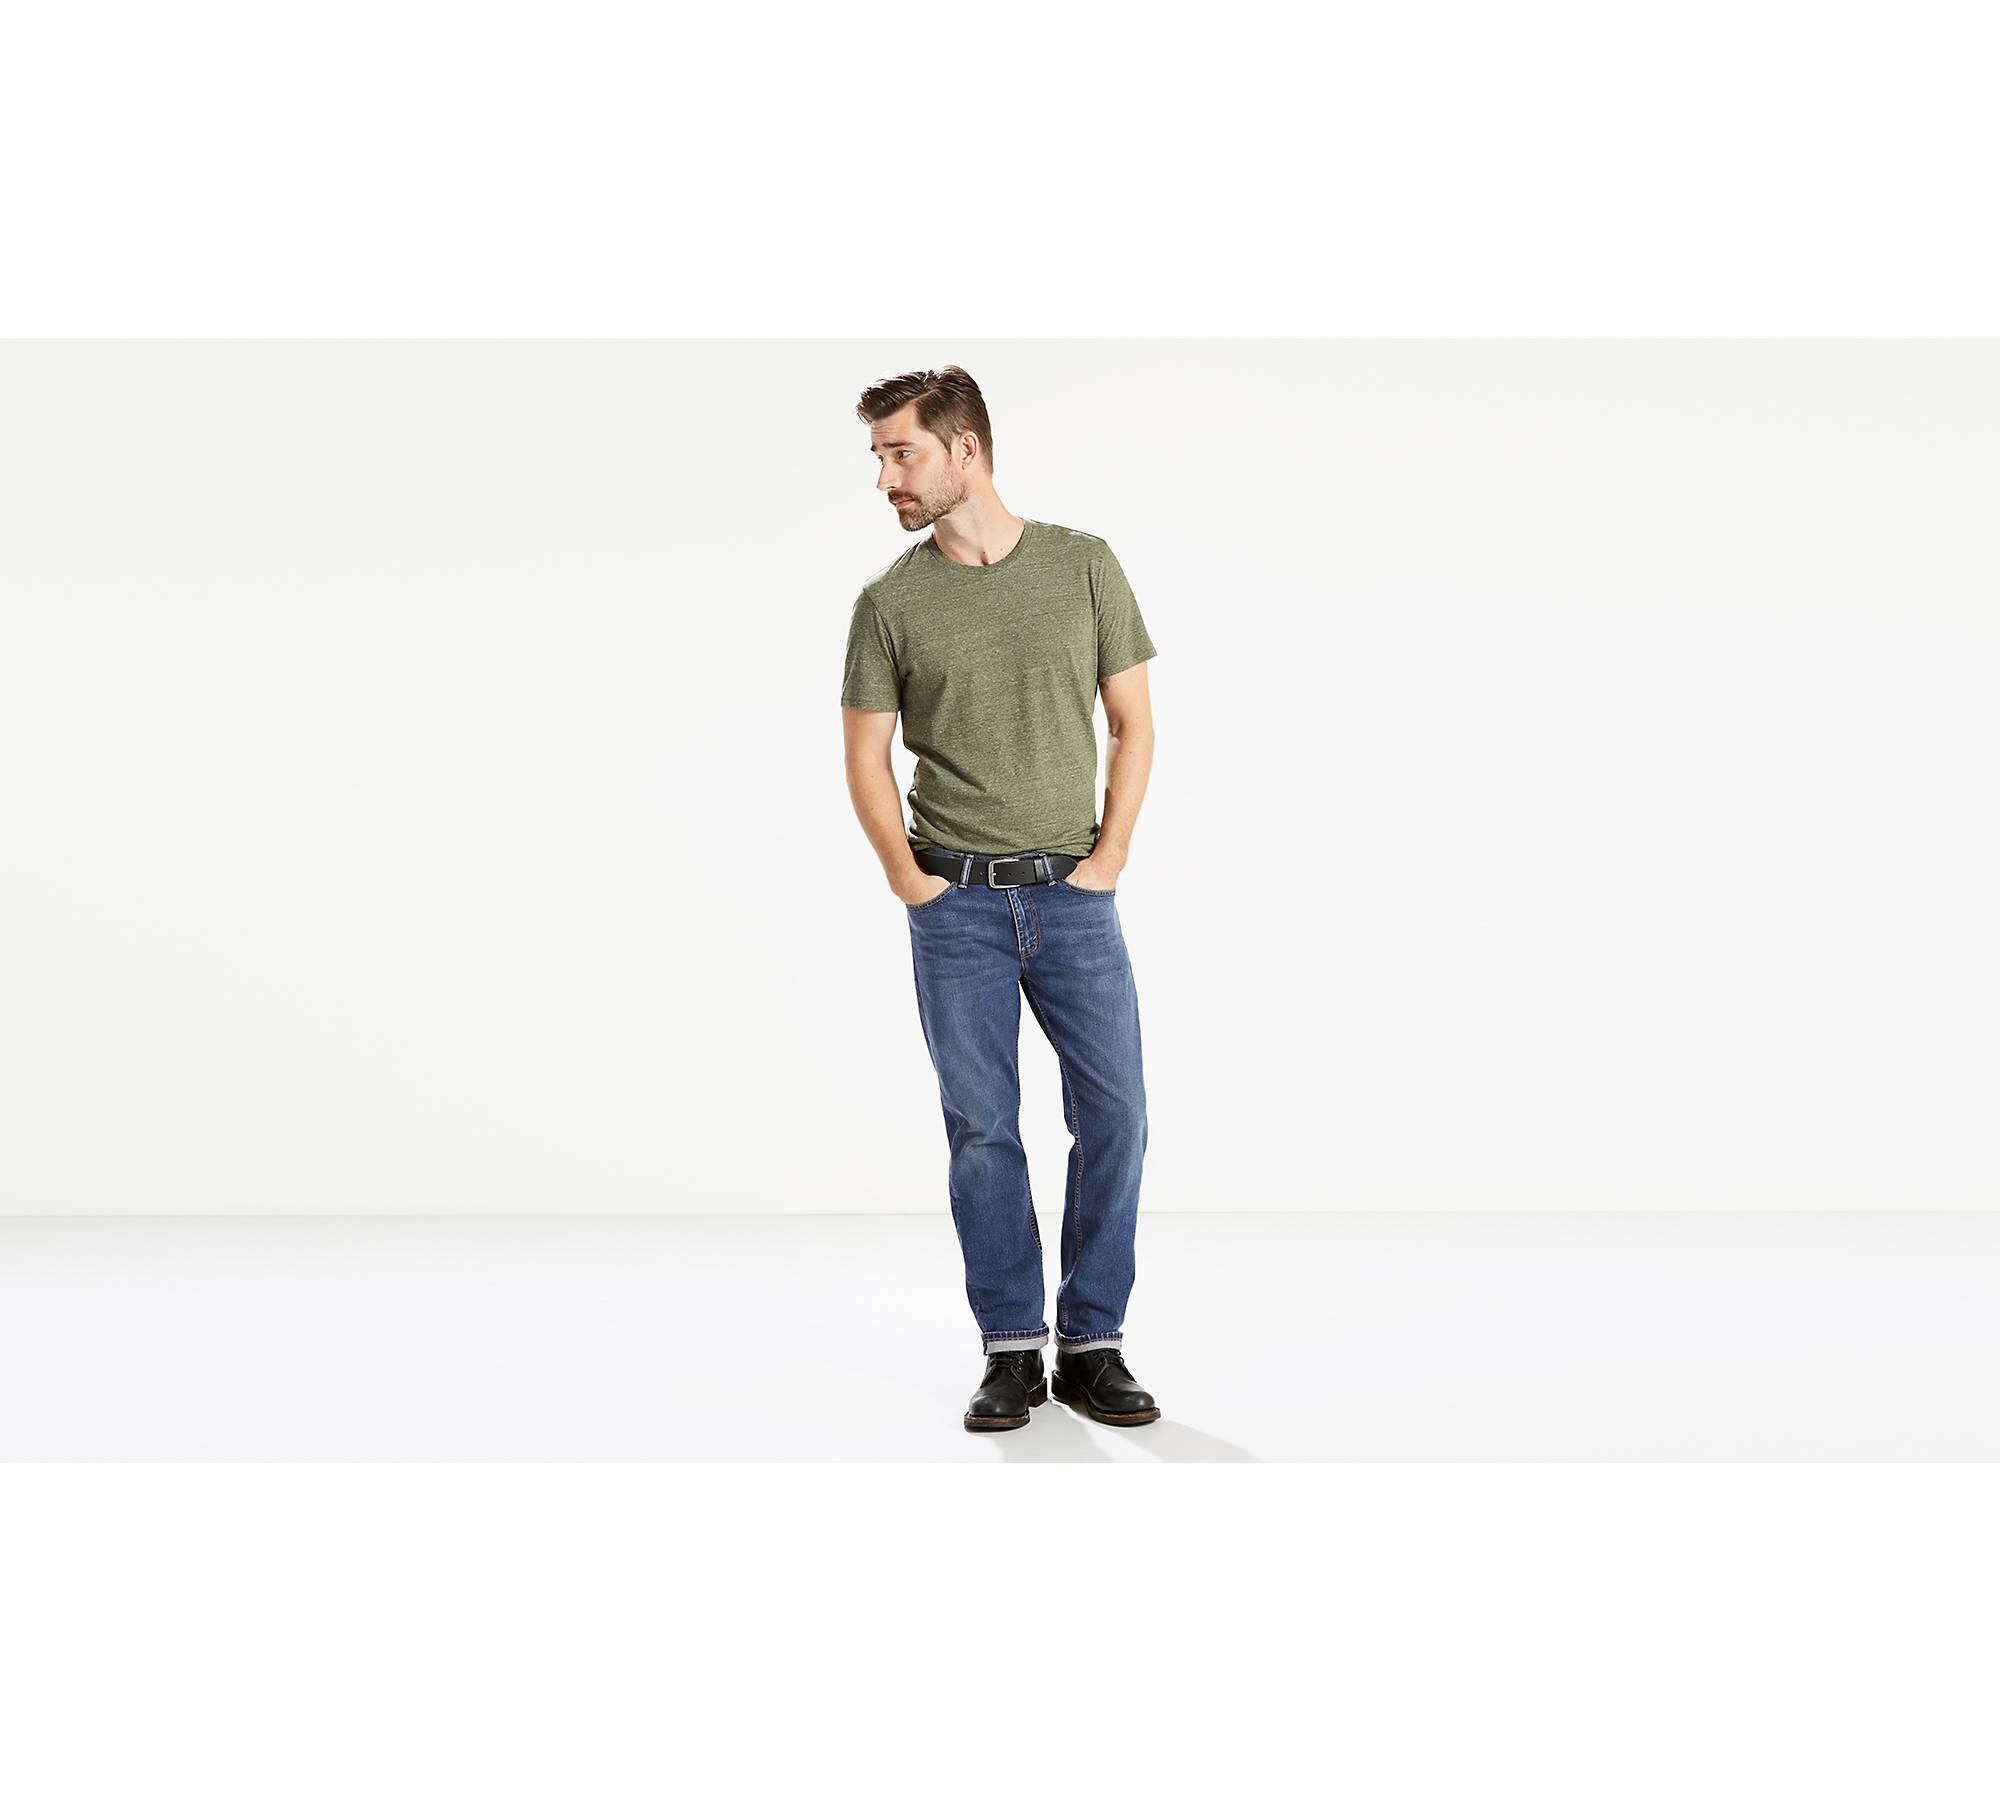 Levis® Made In The Usa 505™ Regular Fit Men's Jeans - Medium Wash